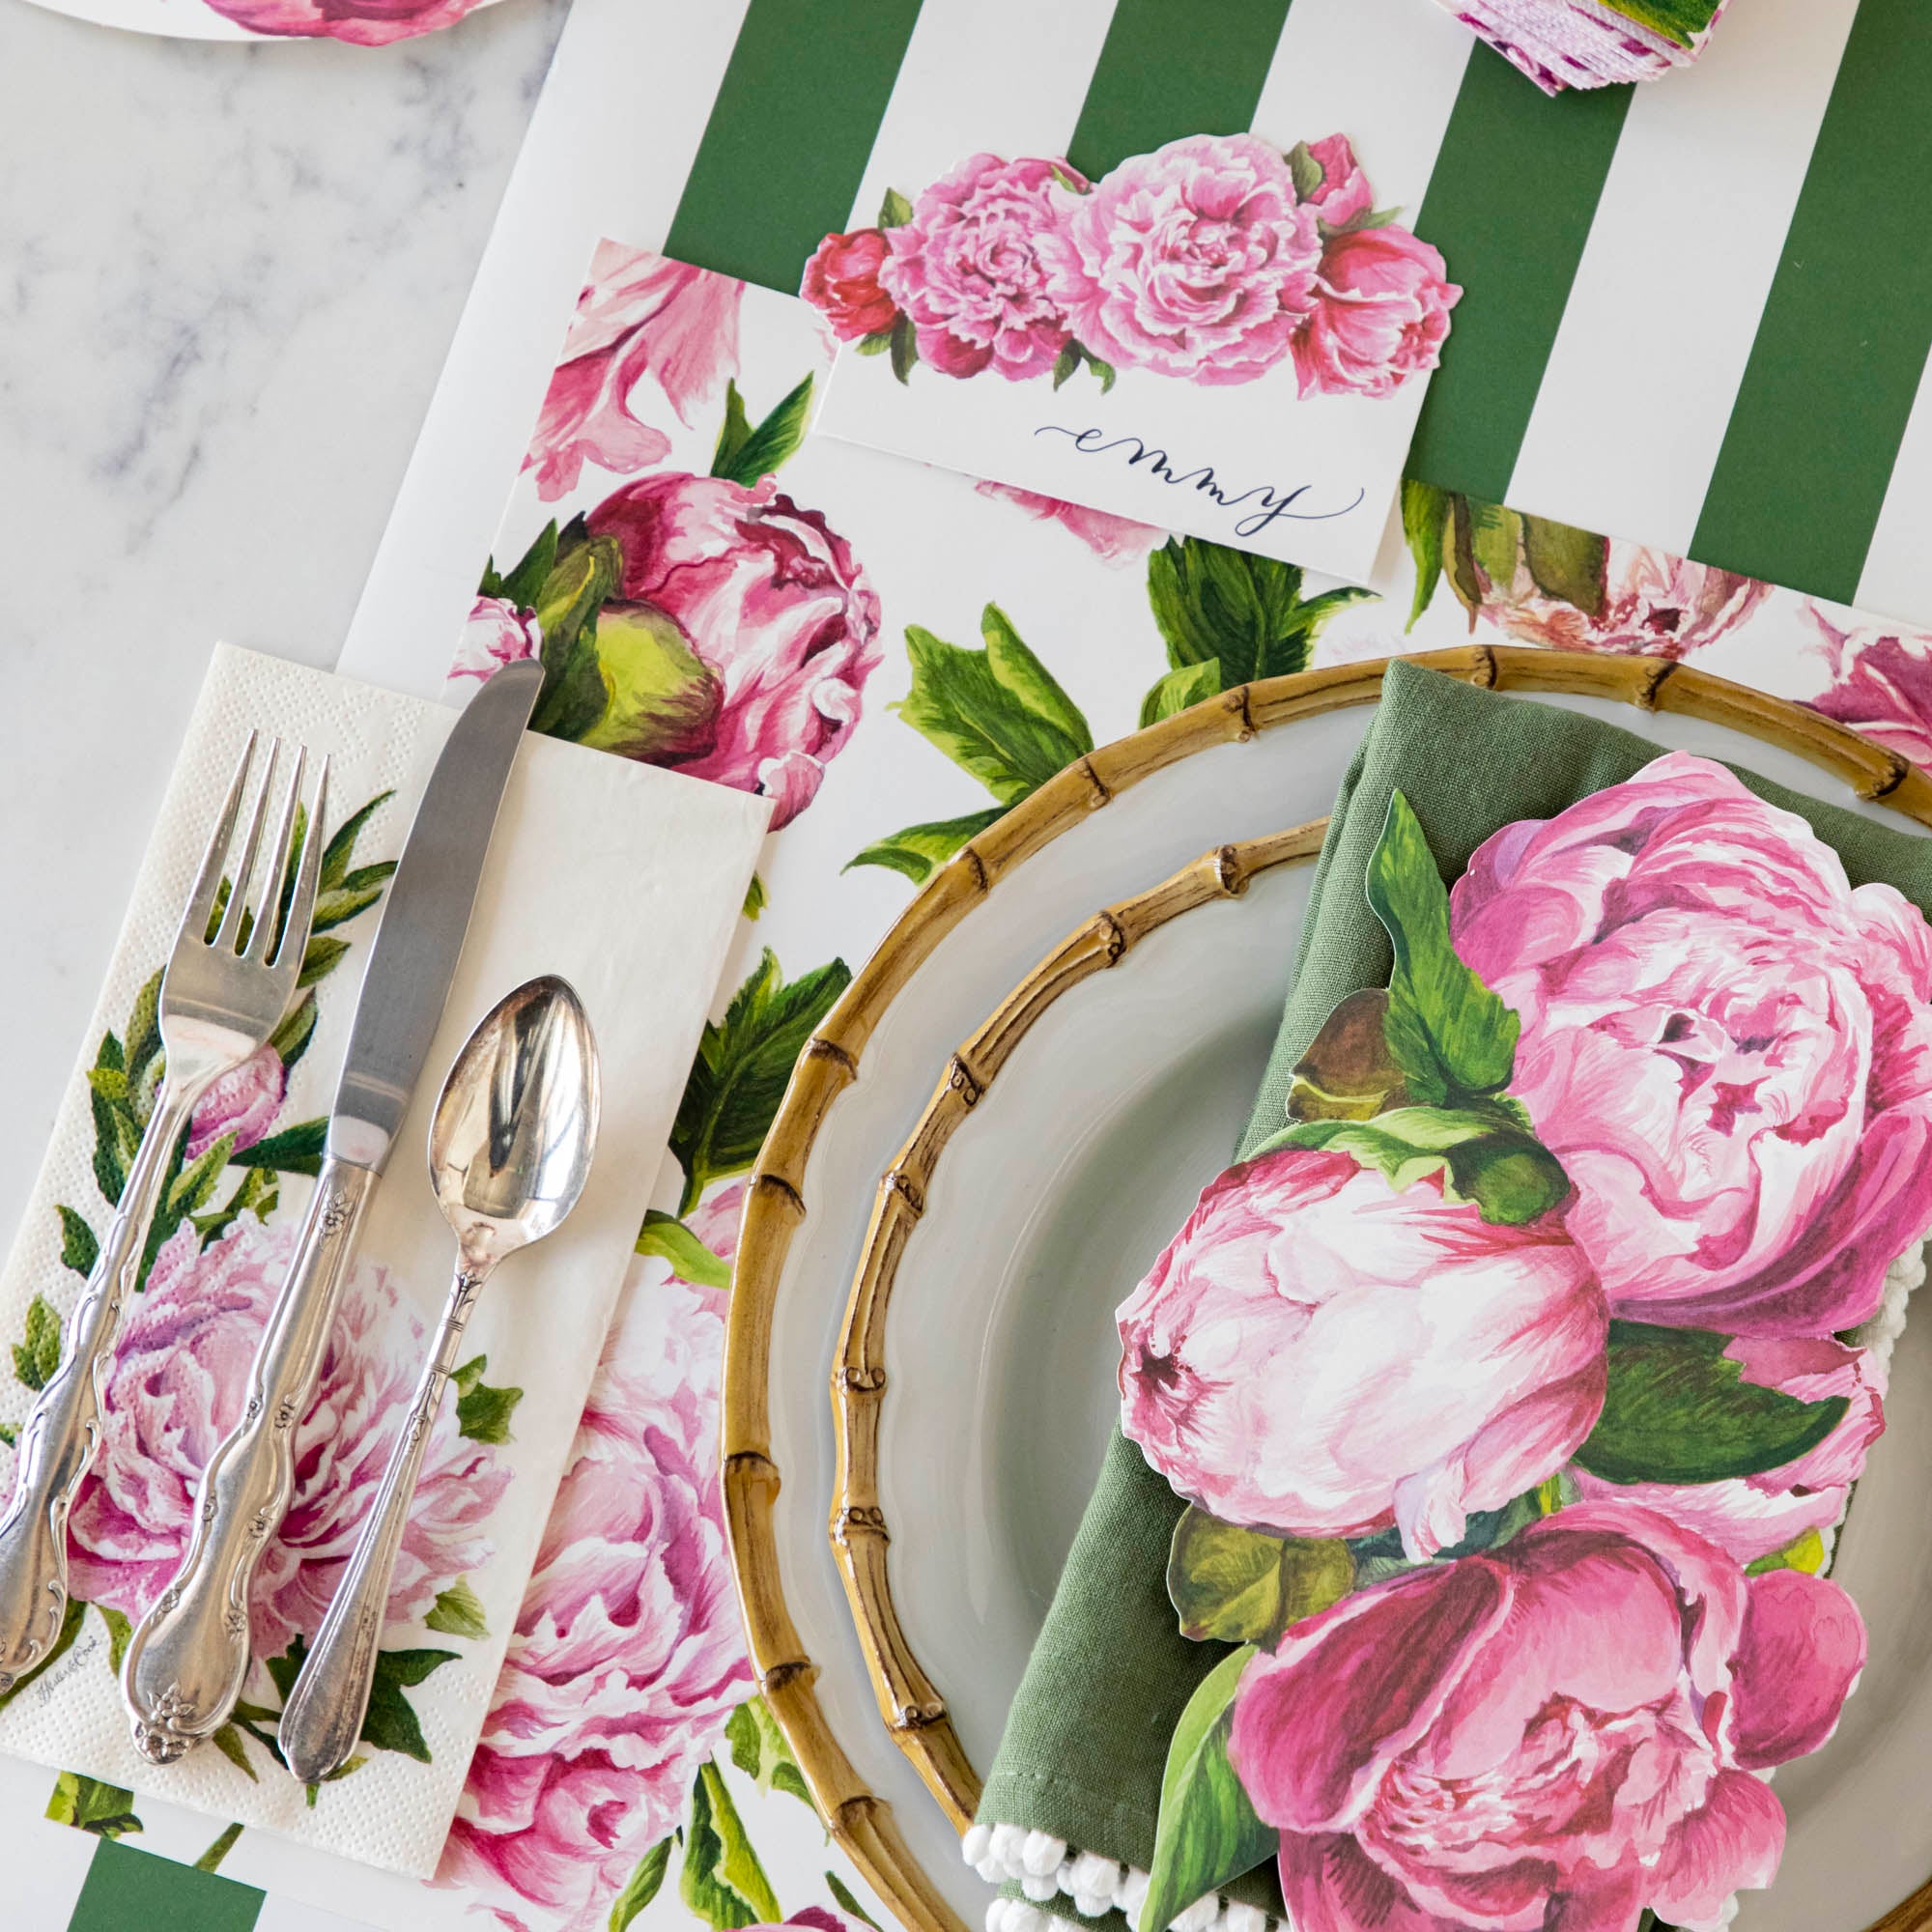 An elegant table setting with a Peonies In Bloom Placemat by Hester &amp; Cook, plate, and silverware.